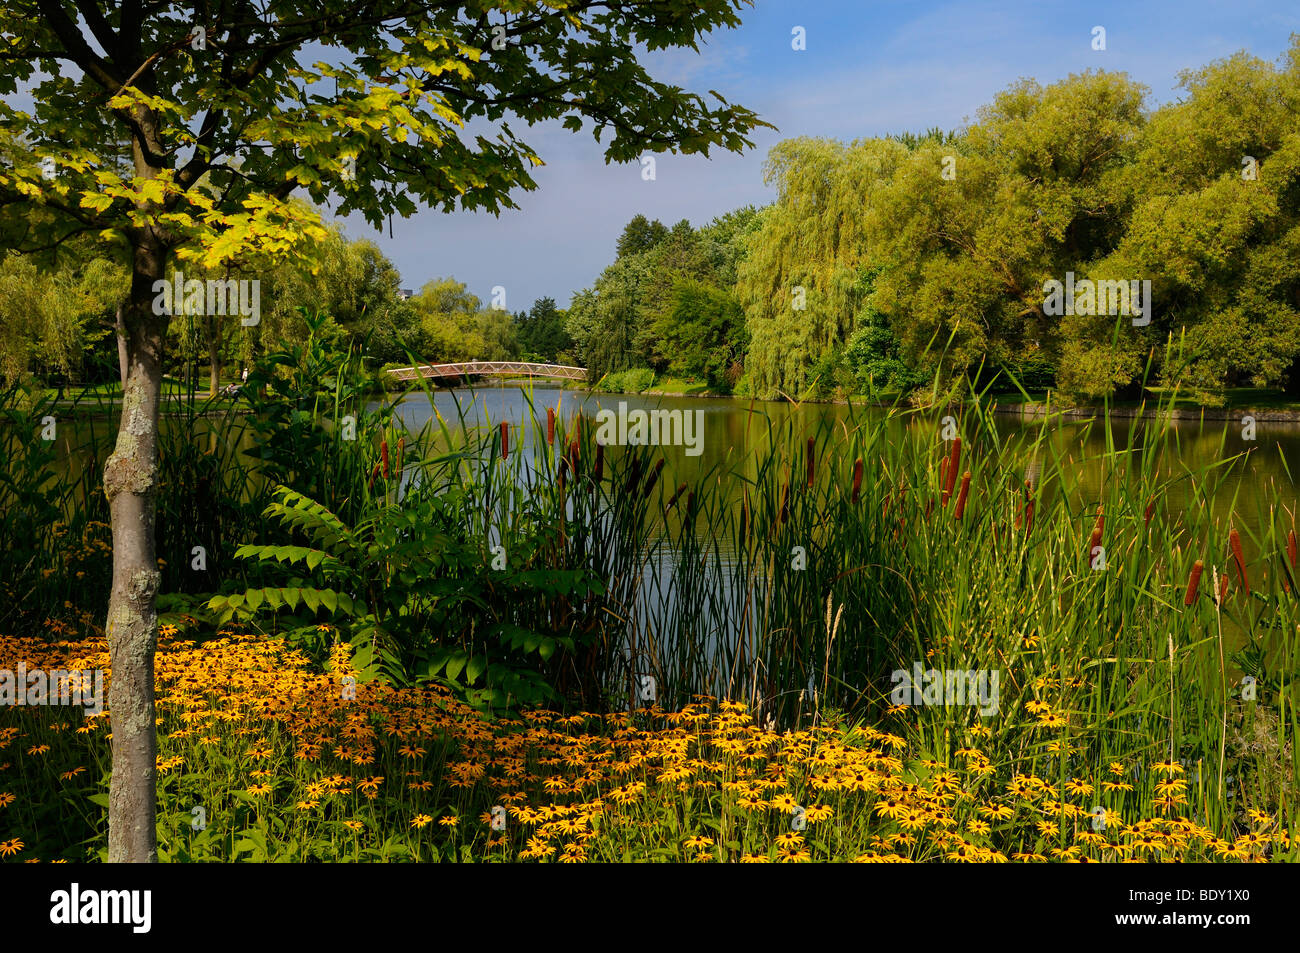 Black Eyed Susan, Cattails, Willows, and footbridge at Victoria Park Lake in Kitchener Ontario Canada Stock Photo